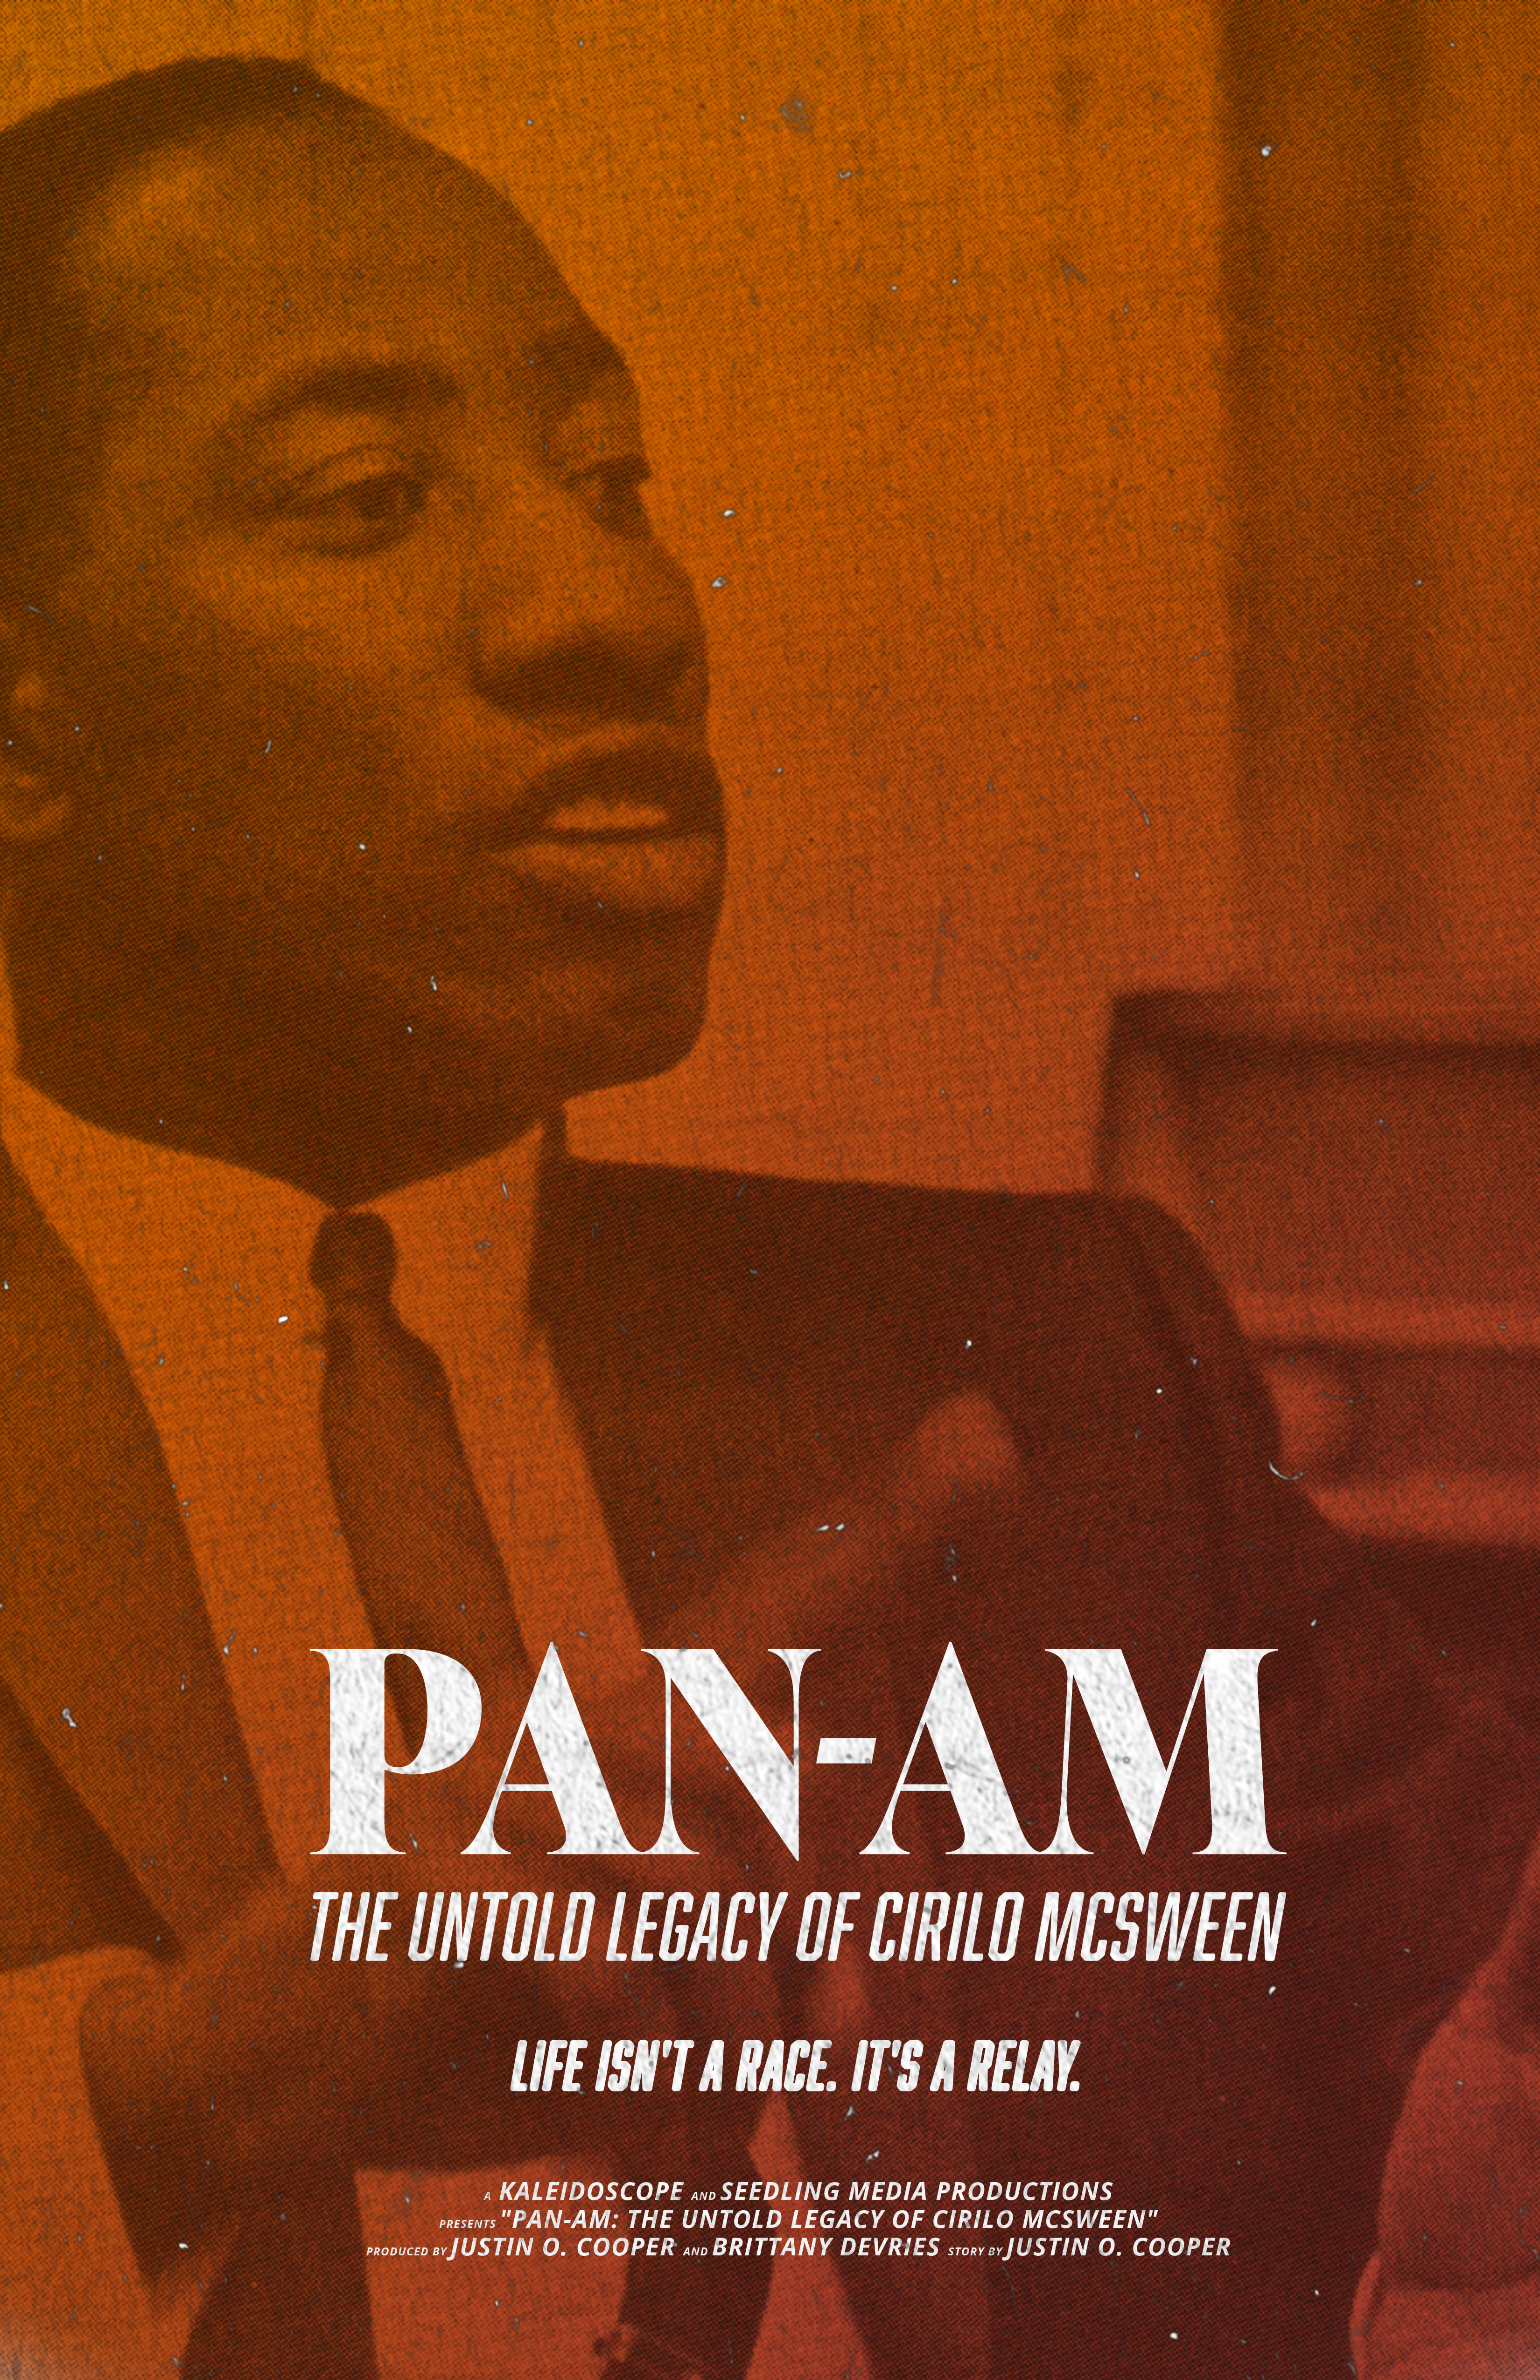 PAN-AM: THE UNTOLD LEGACY OF CIRILO MCSWEEN